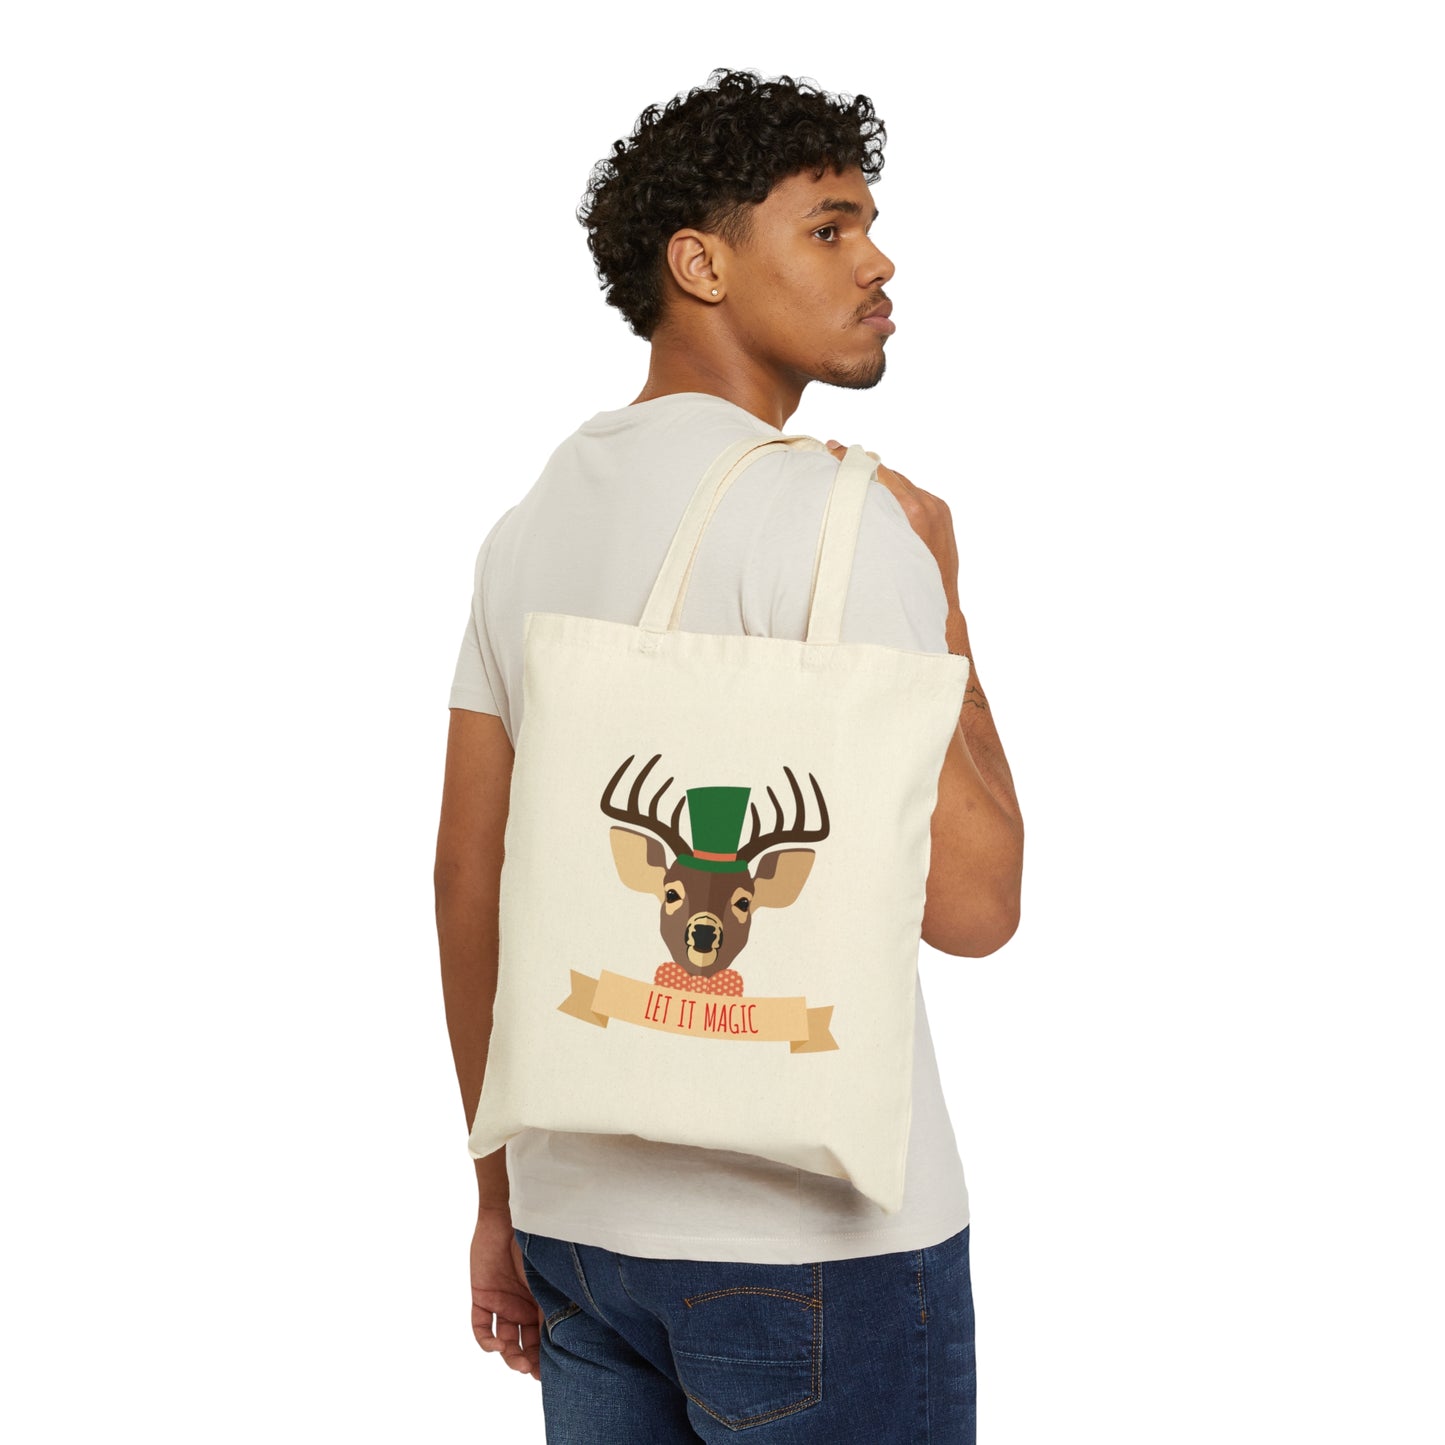 Let It Magic Christmas, New Year Canvas Shopping Cotton Tote Bag